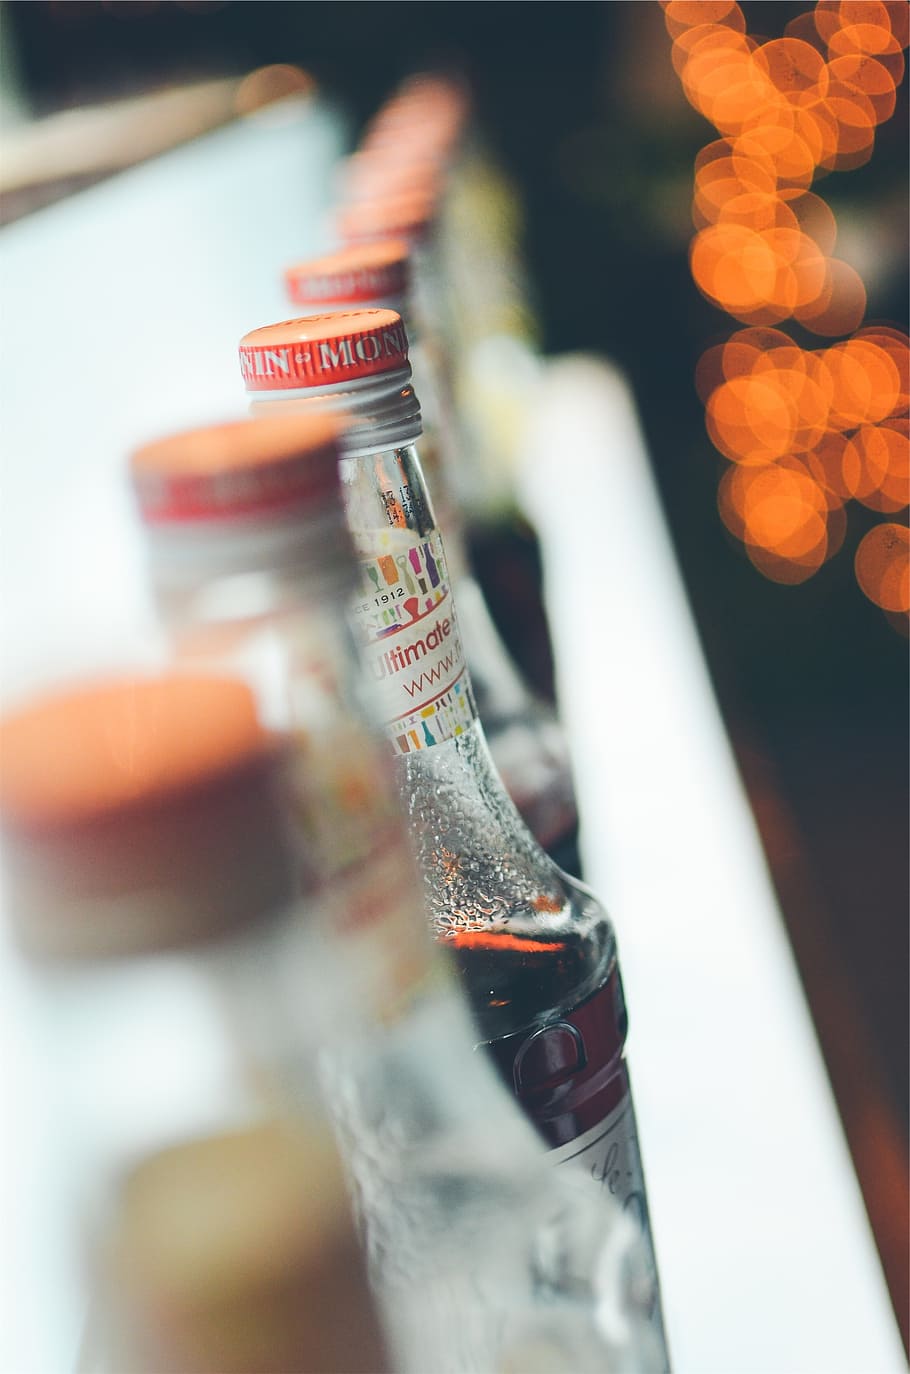 bottles, alcohol, bar, close-up, focus on foreground, bottle, selective focus, indoors, still life, food and drink